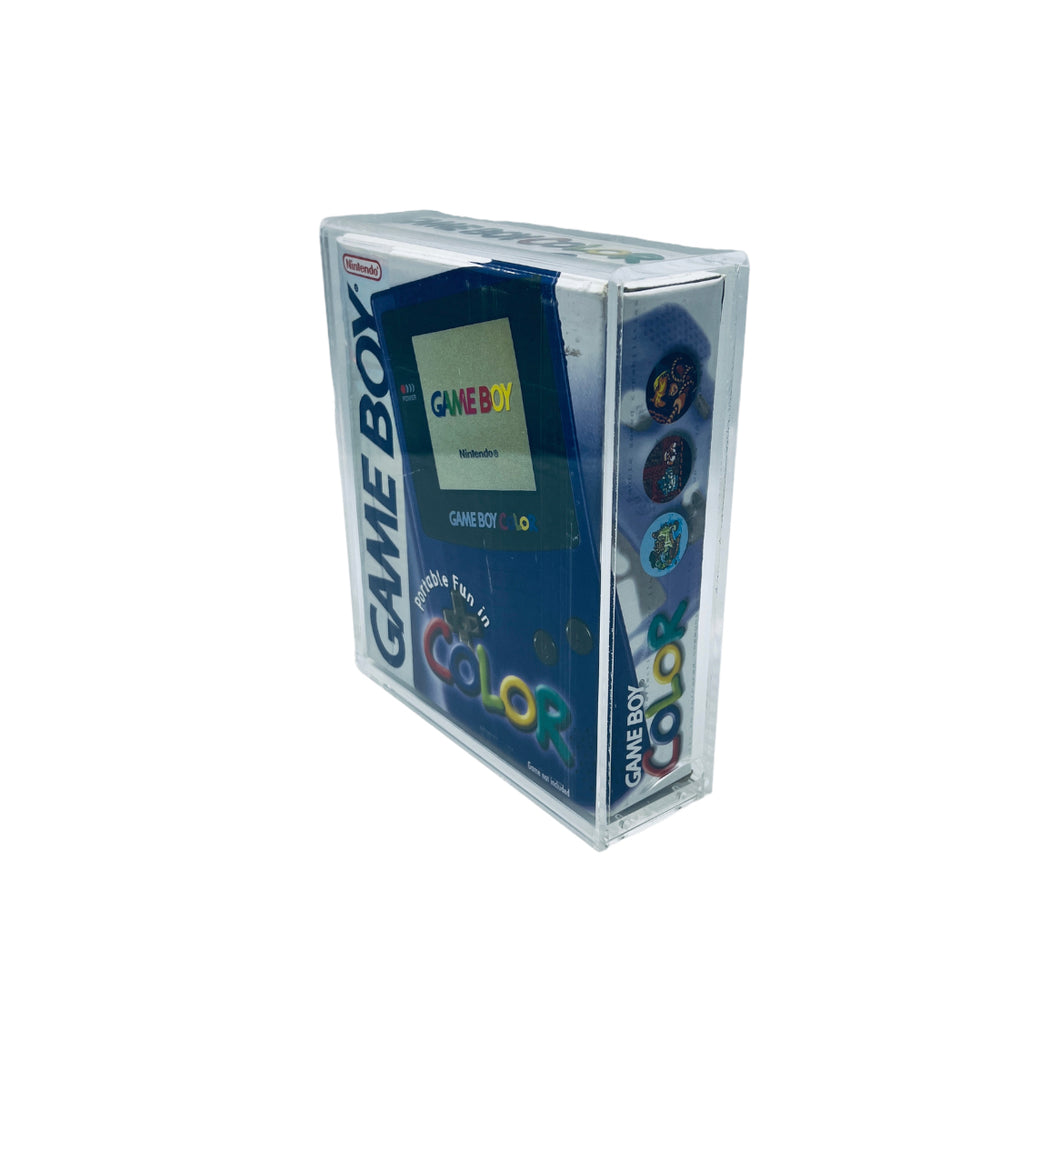 PRE-ORDER! RESTOCK EARLY MARCH - Nintendo Game Boy Color Console Box Size UV Protected Magnetic Locking Hard Case 4mm thick acrylic